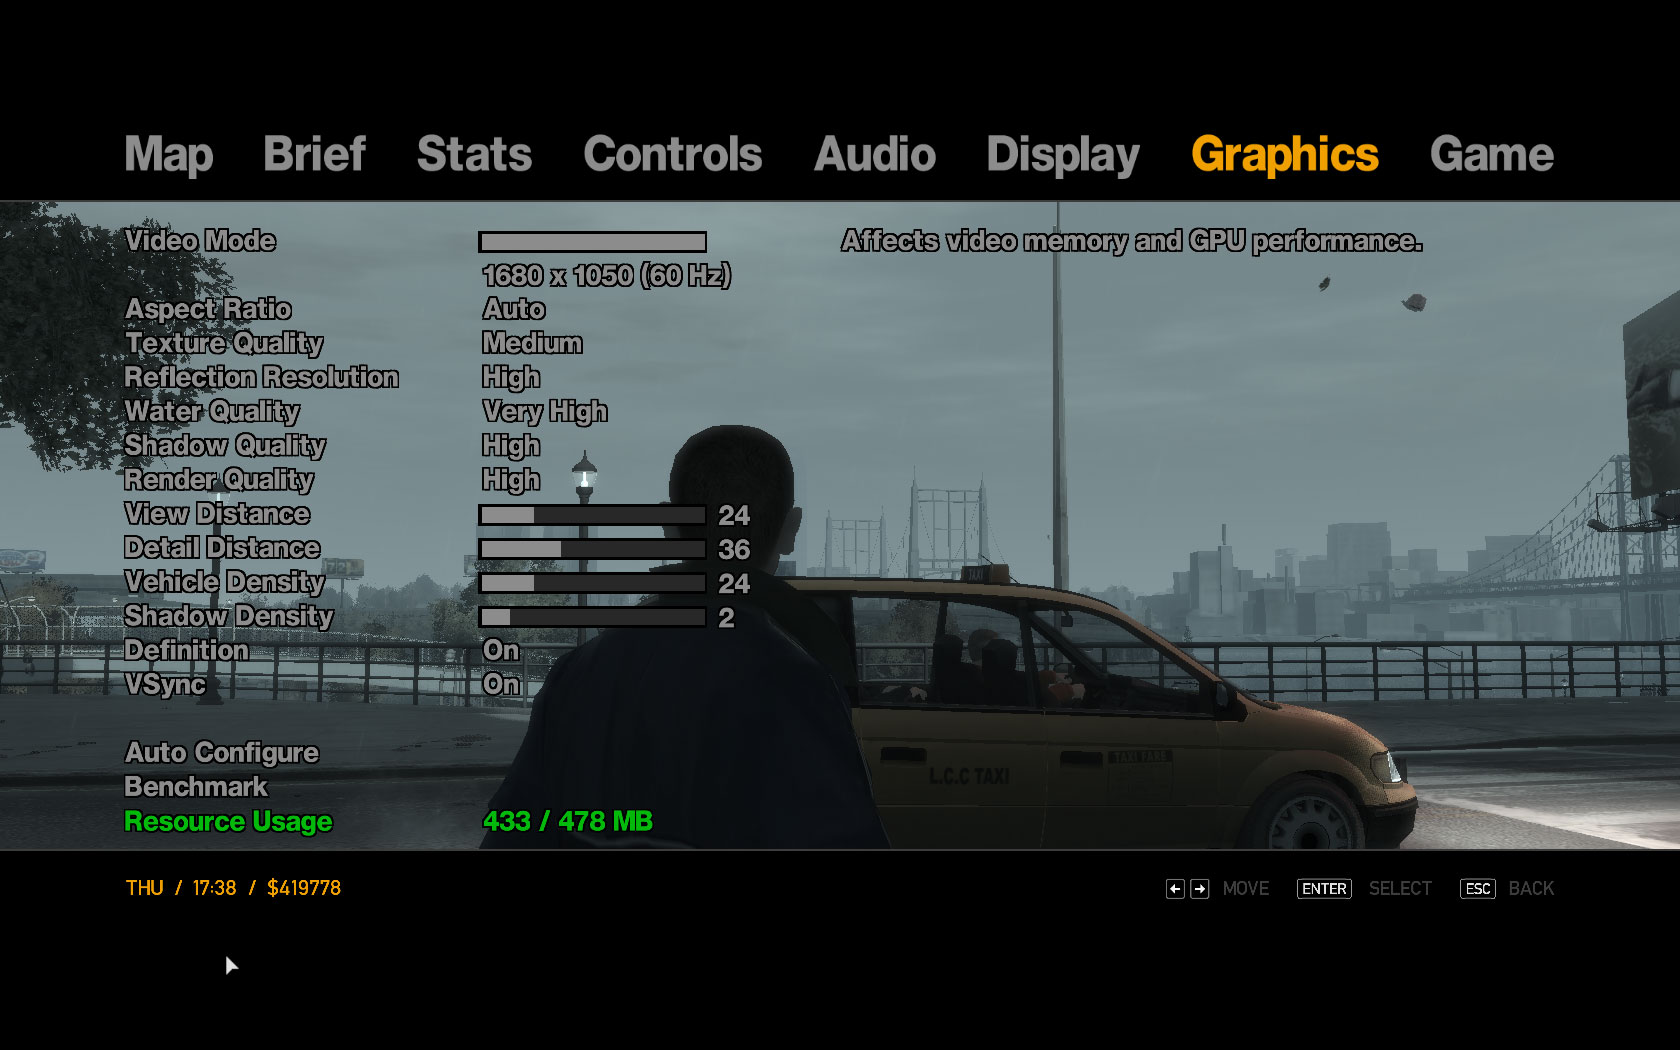 Gta 4 Ps2 Grand Theft Auto Patch .